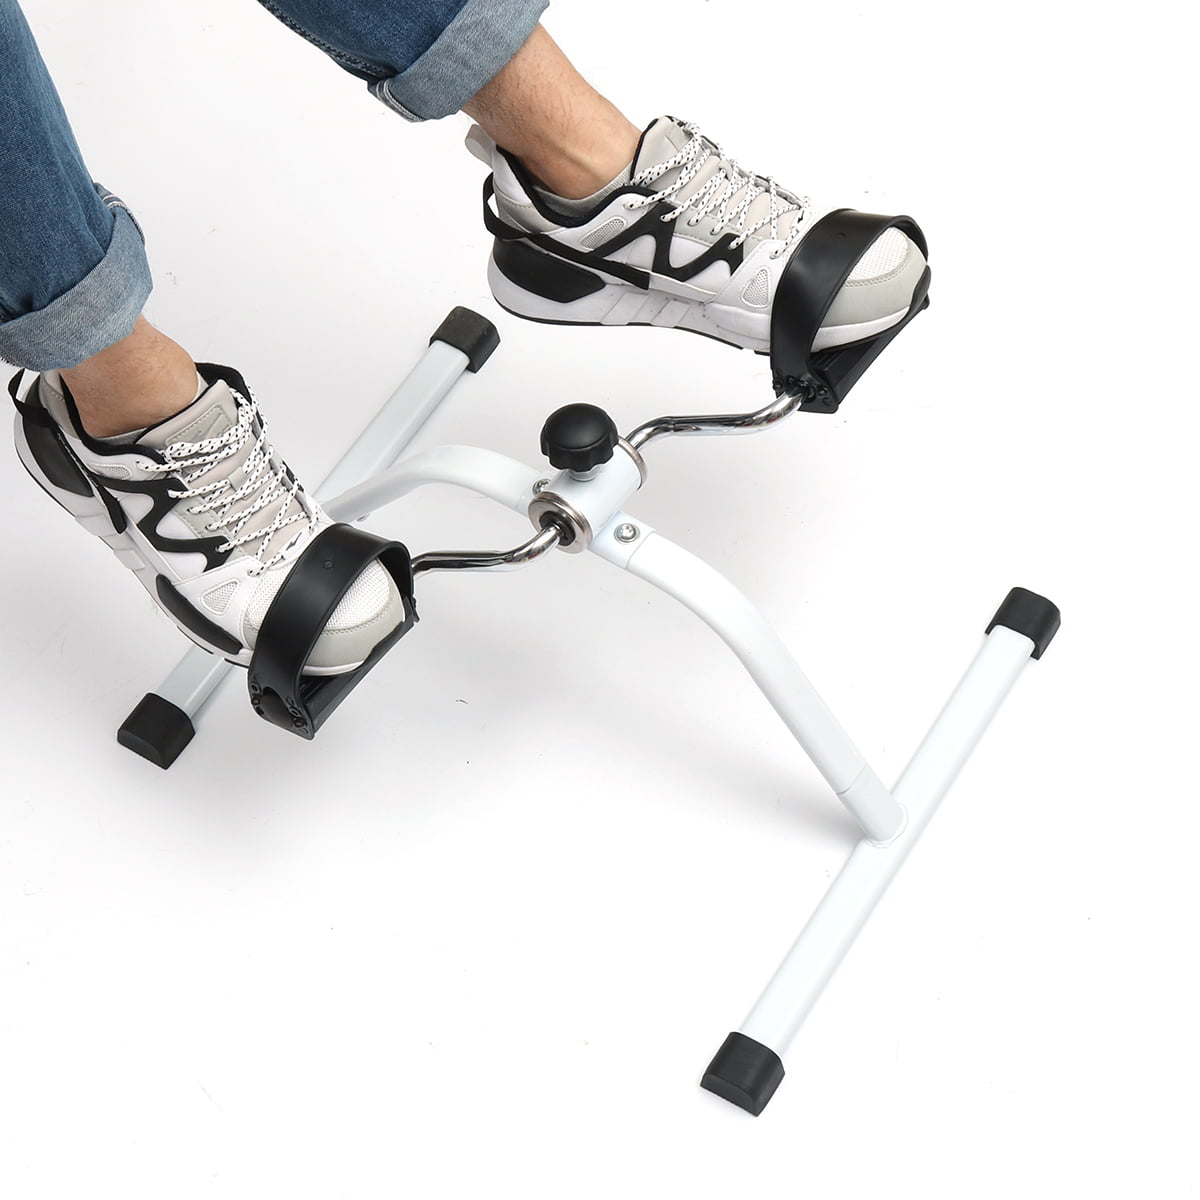 Simple Best Fitness Equipment For Seniors for Weight Loss